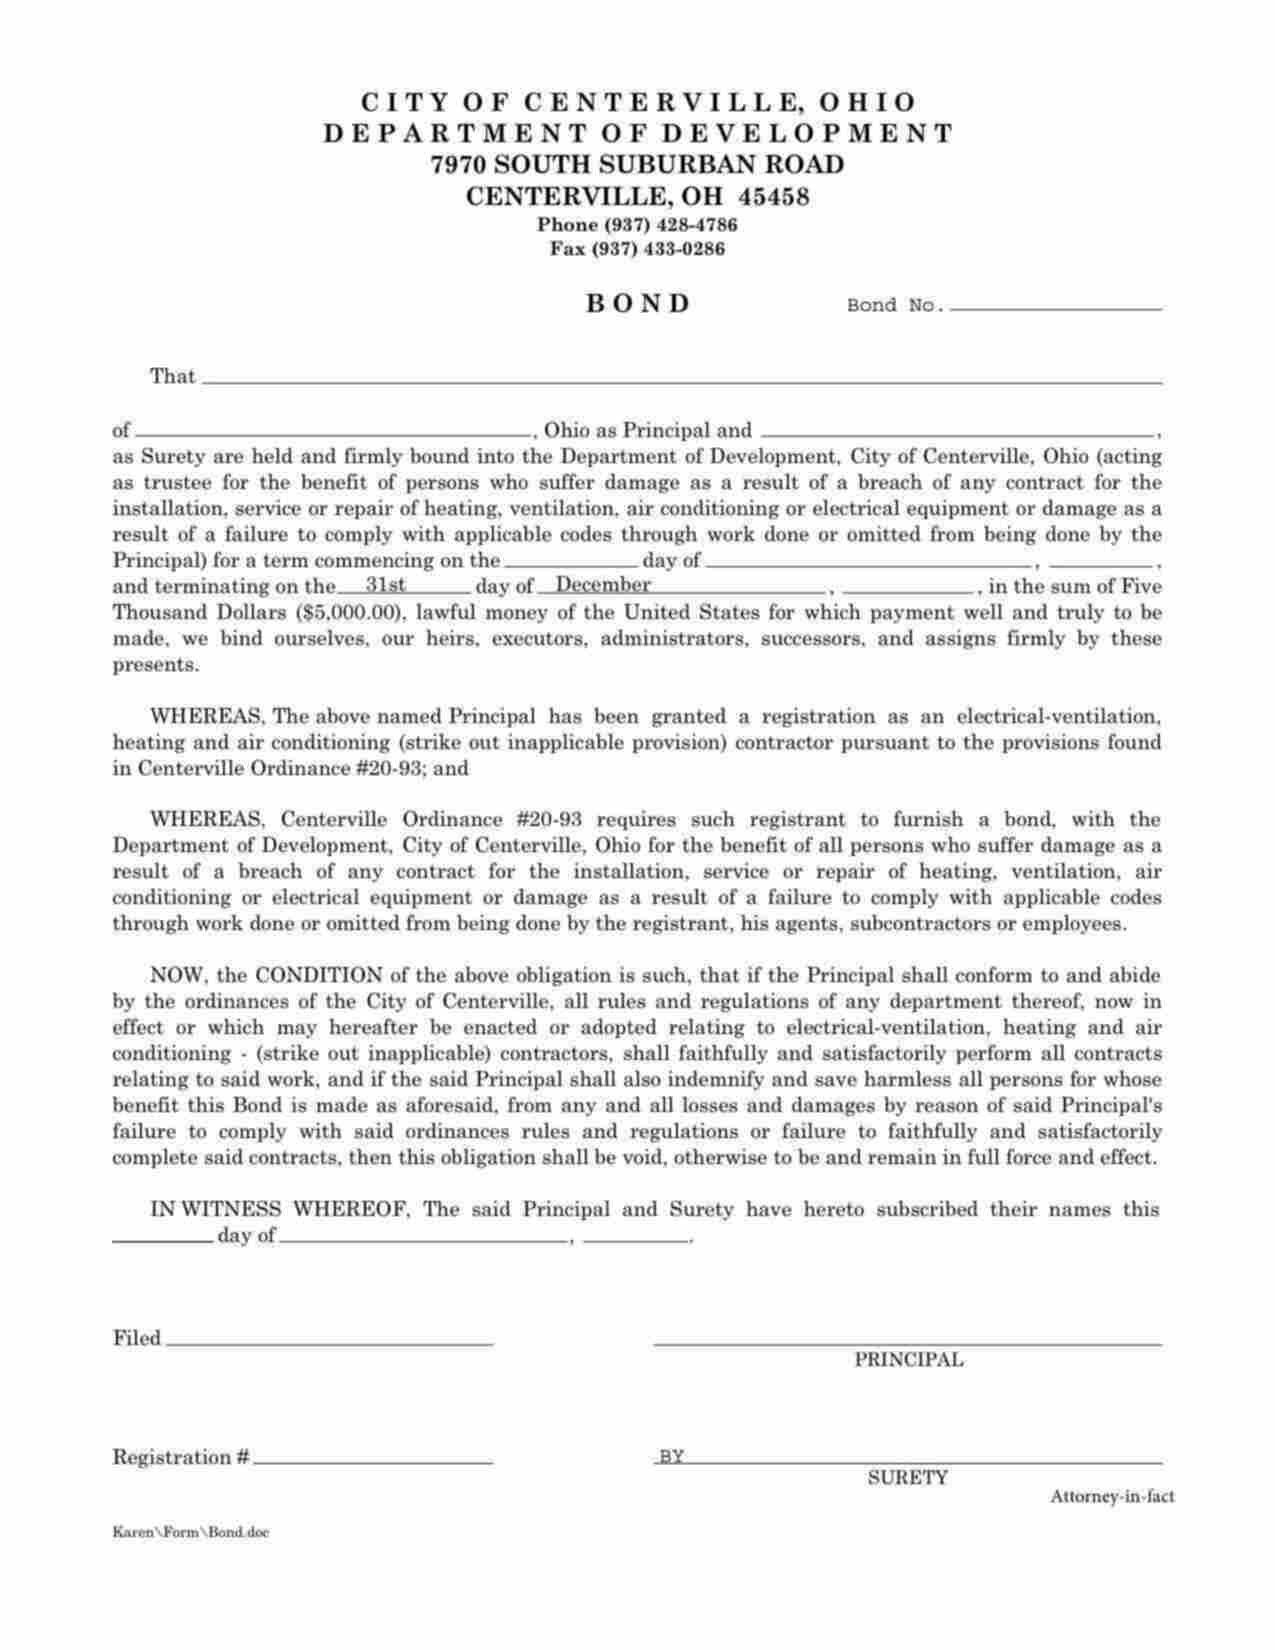 Ohio Heating and Air Conditioning (HVAC) Bond Form